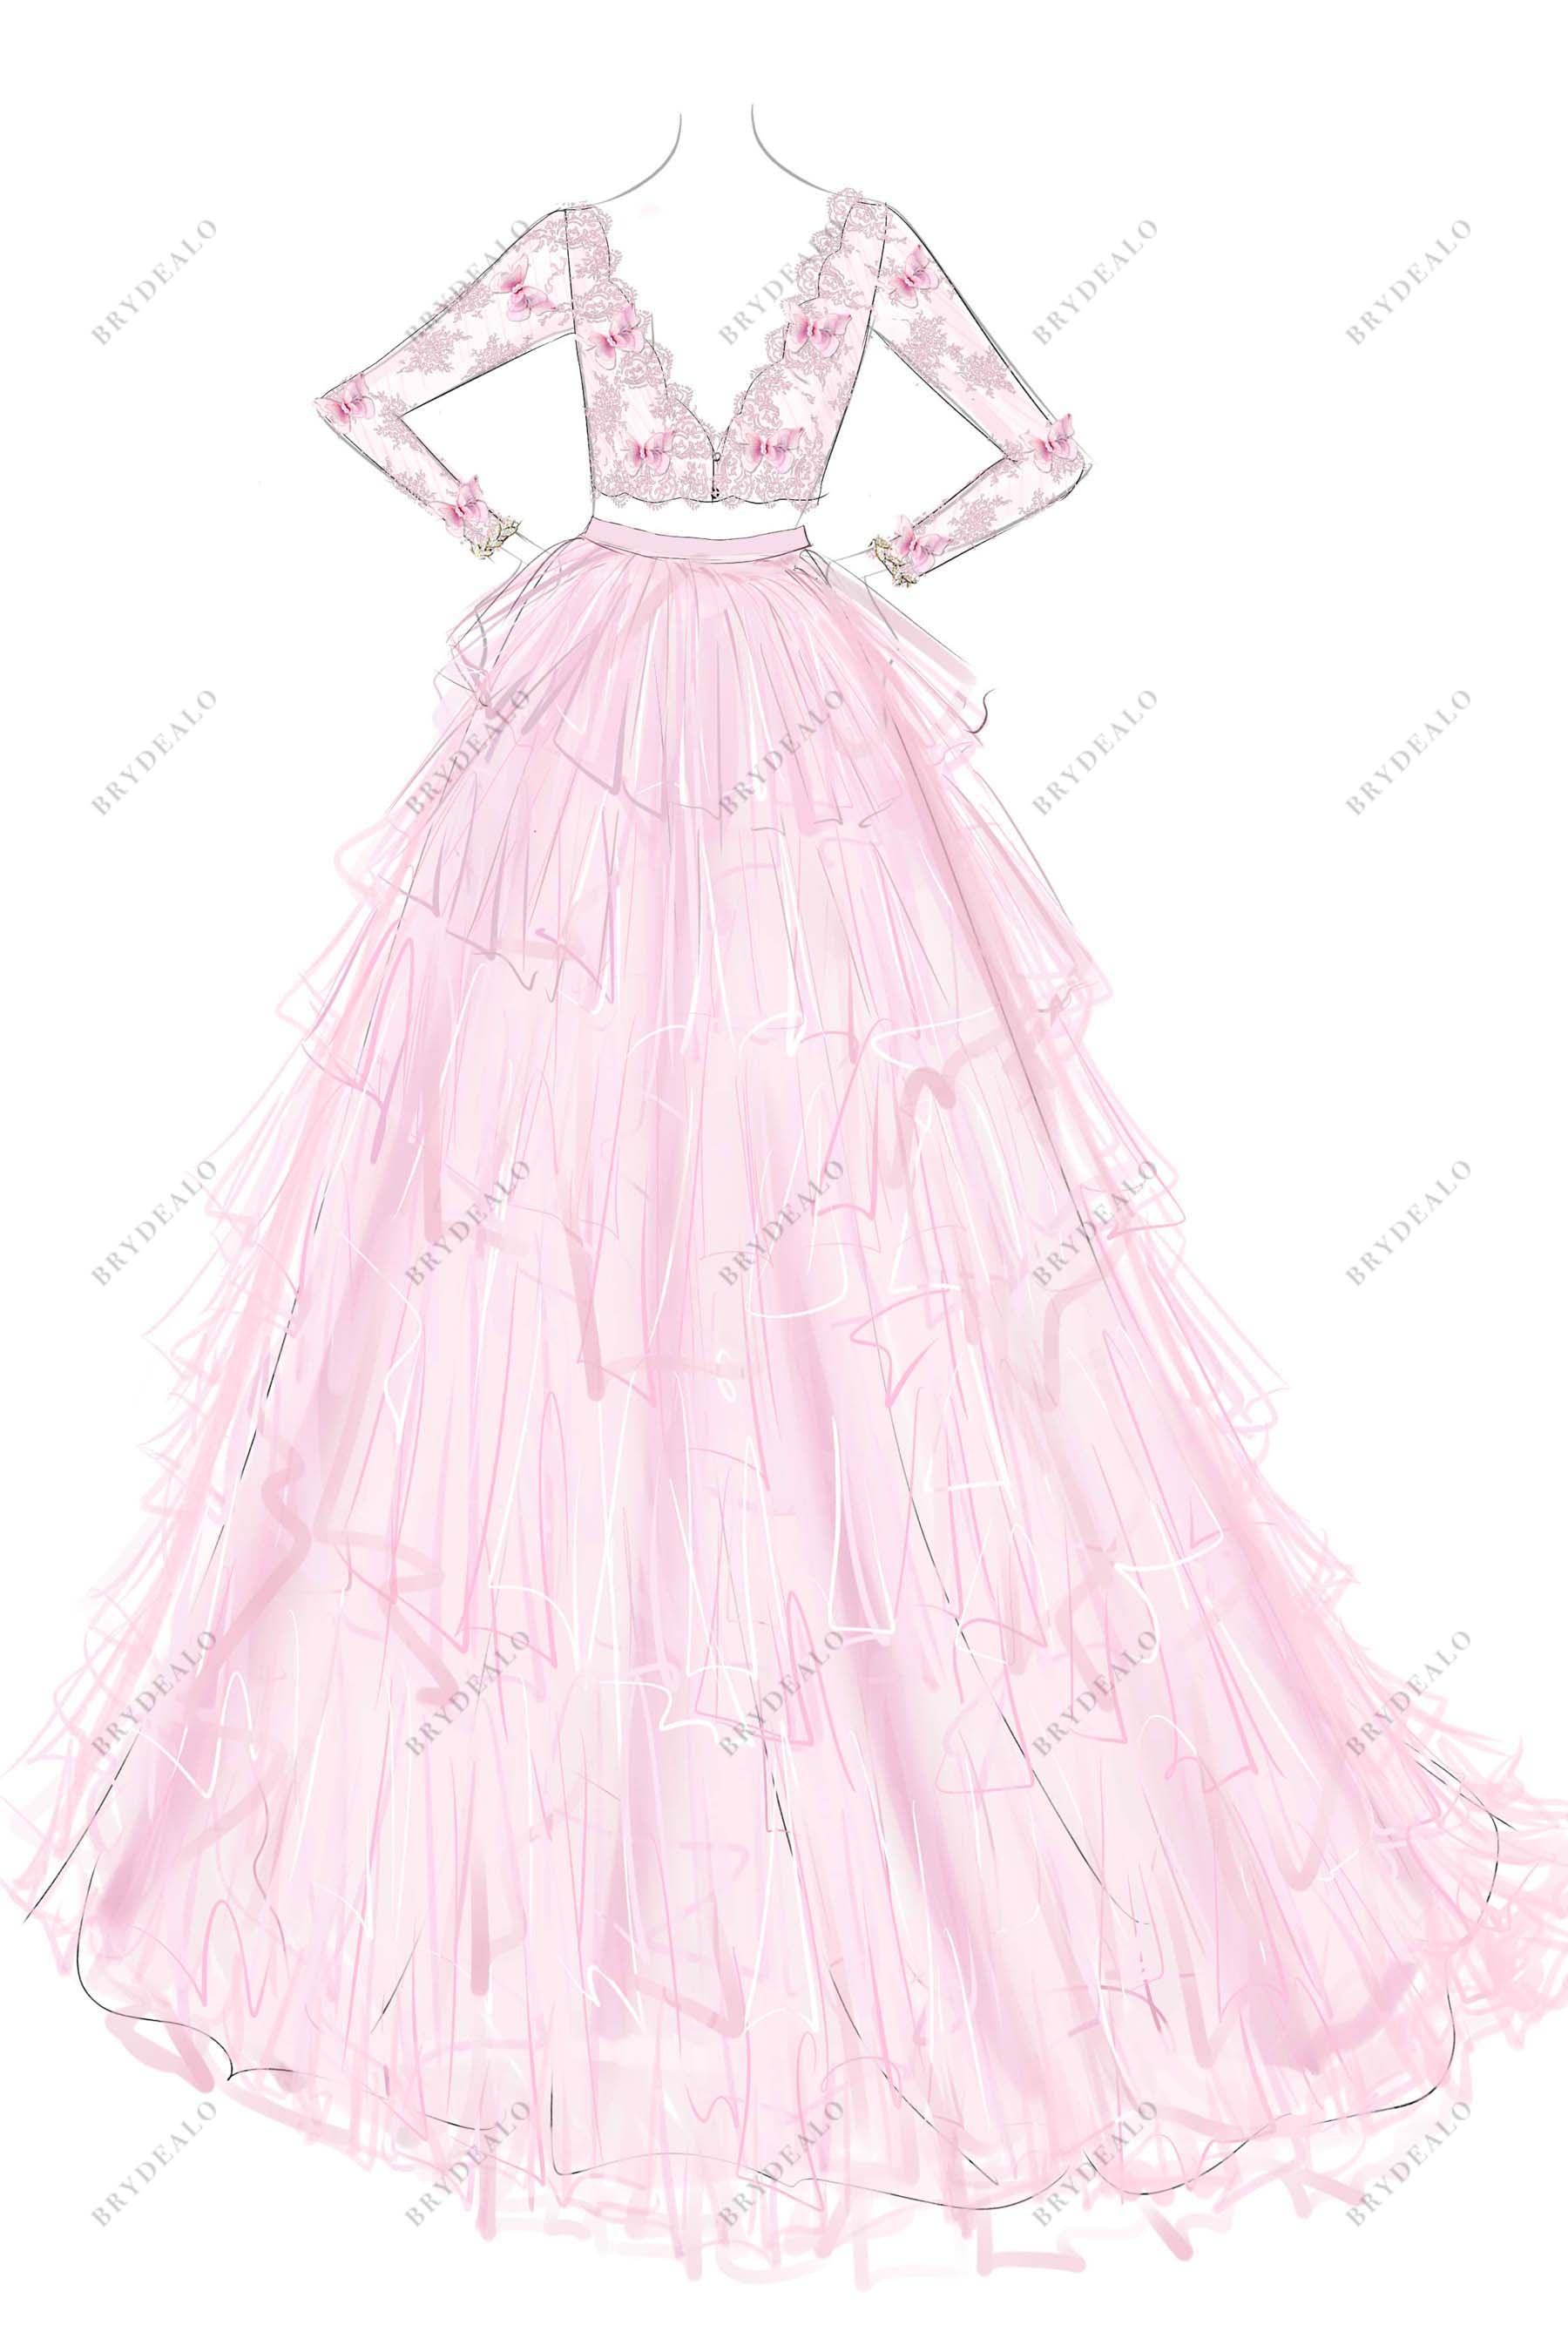 V-back pink two-piece lace tulle wedding dress sketch